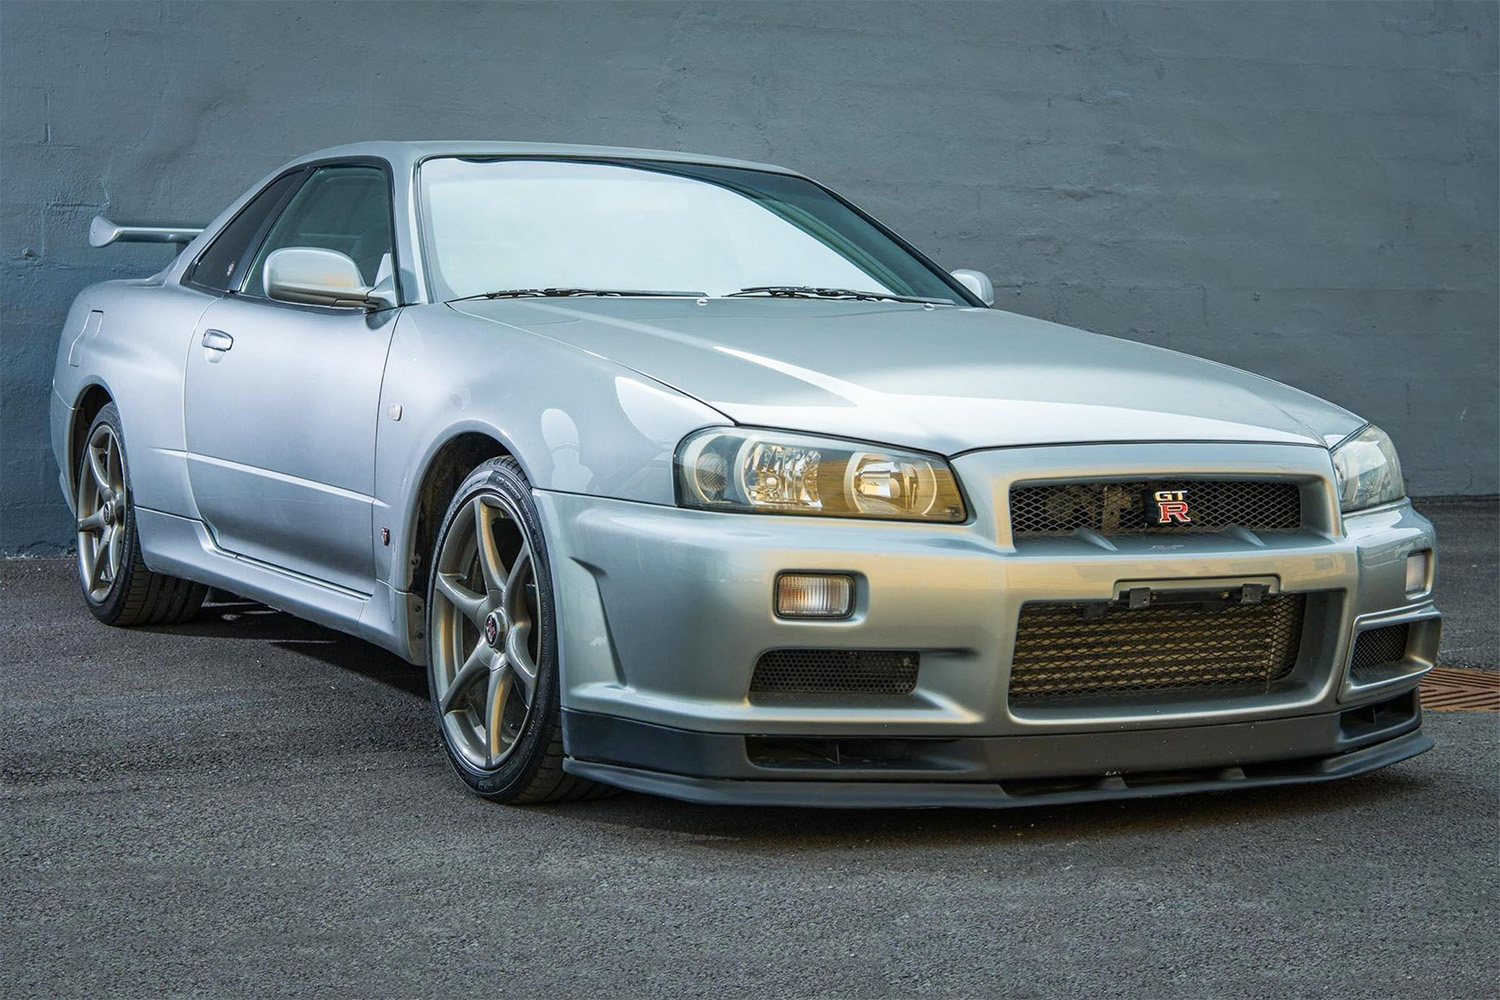 Front 3/4 view of Left Hand Drive Converted Nissan Skyline R34 GT-R 